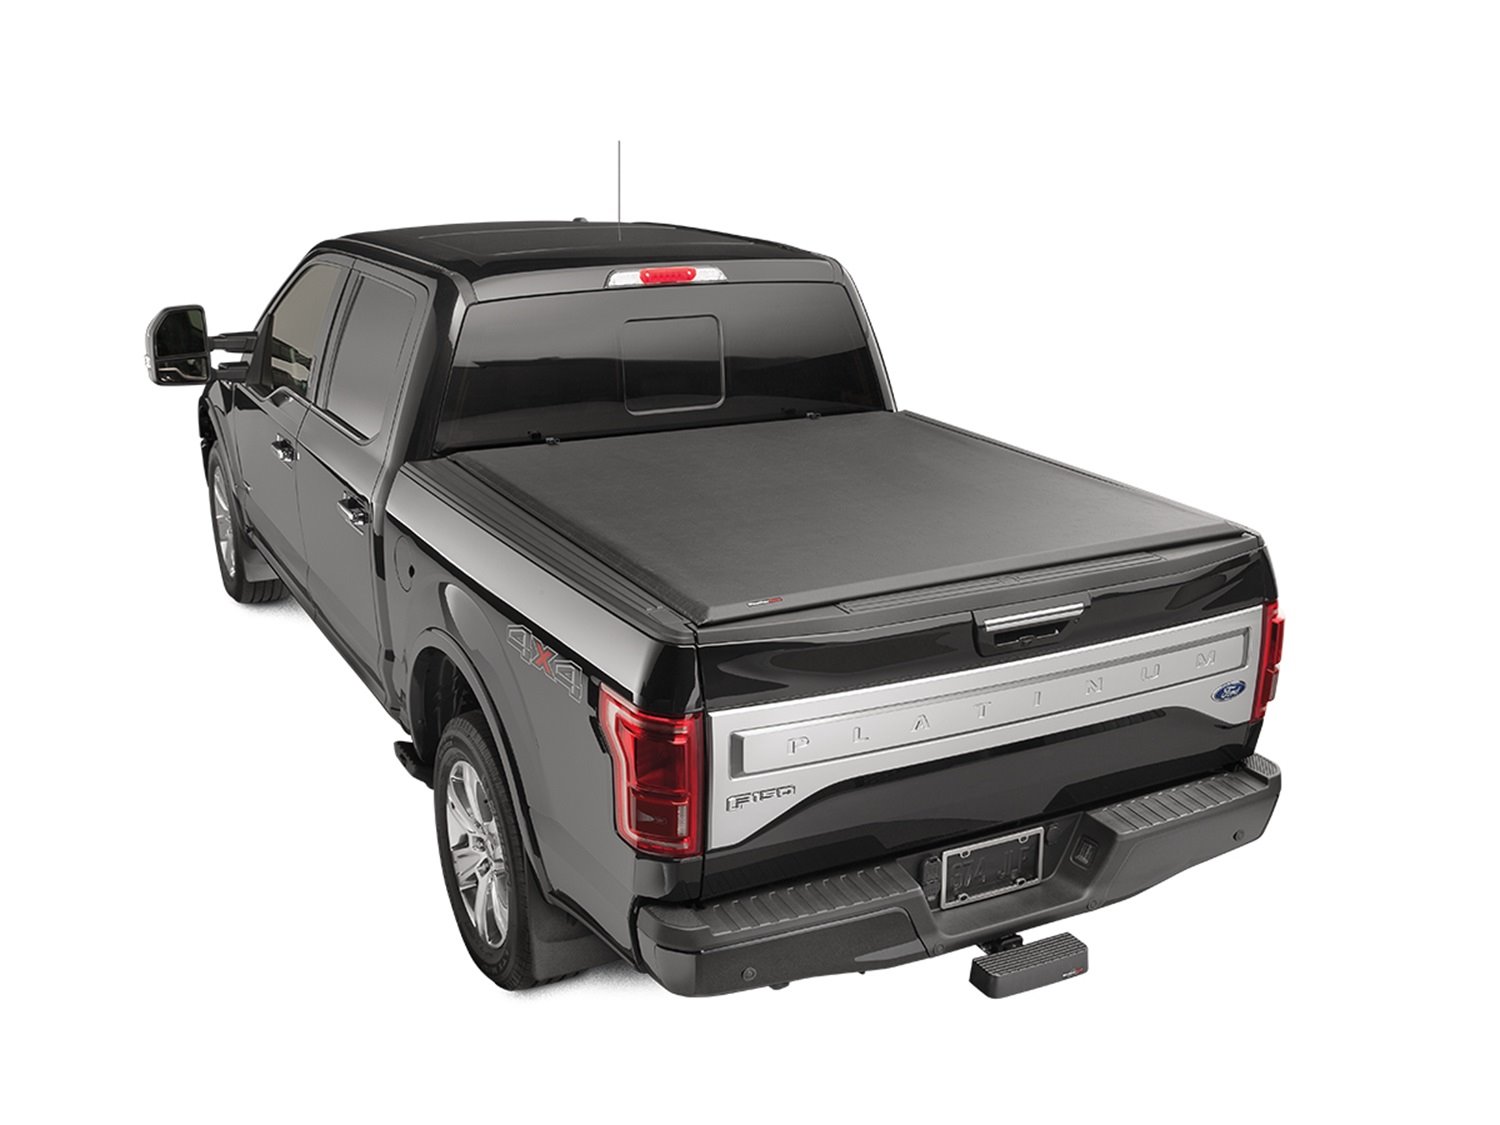 ROLL UP TRUCK BED COVER B TOYOTA TUNDRA 2007-2017 TUNDRA 8 BED W/ DECK RAIL